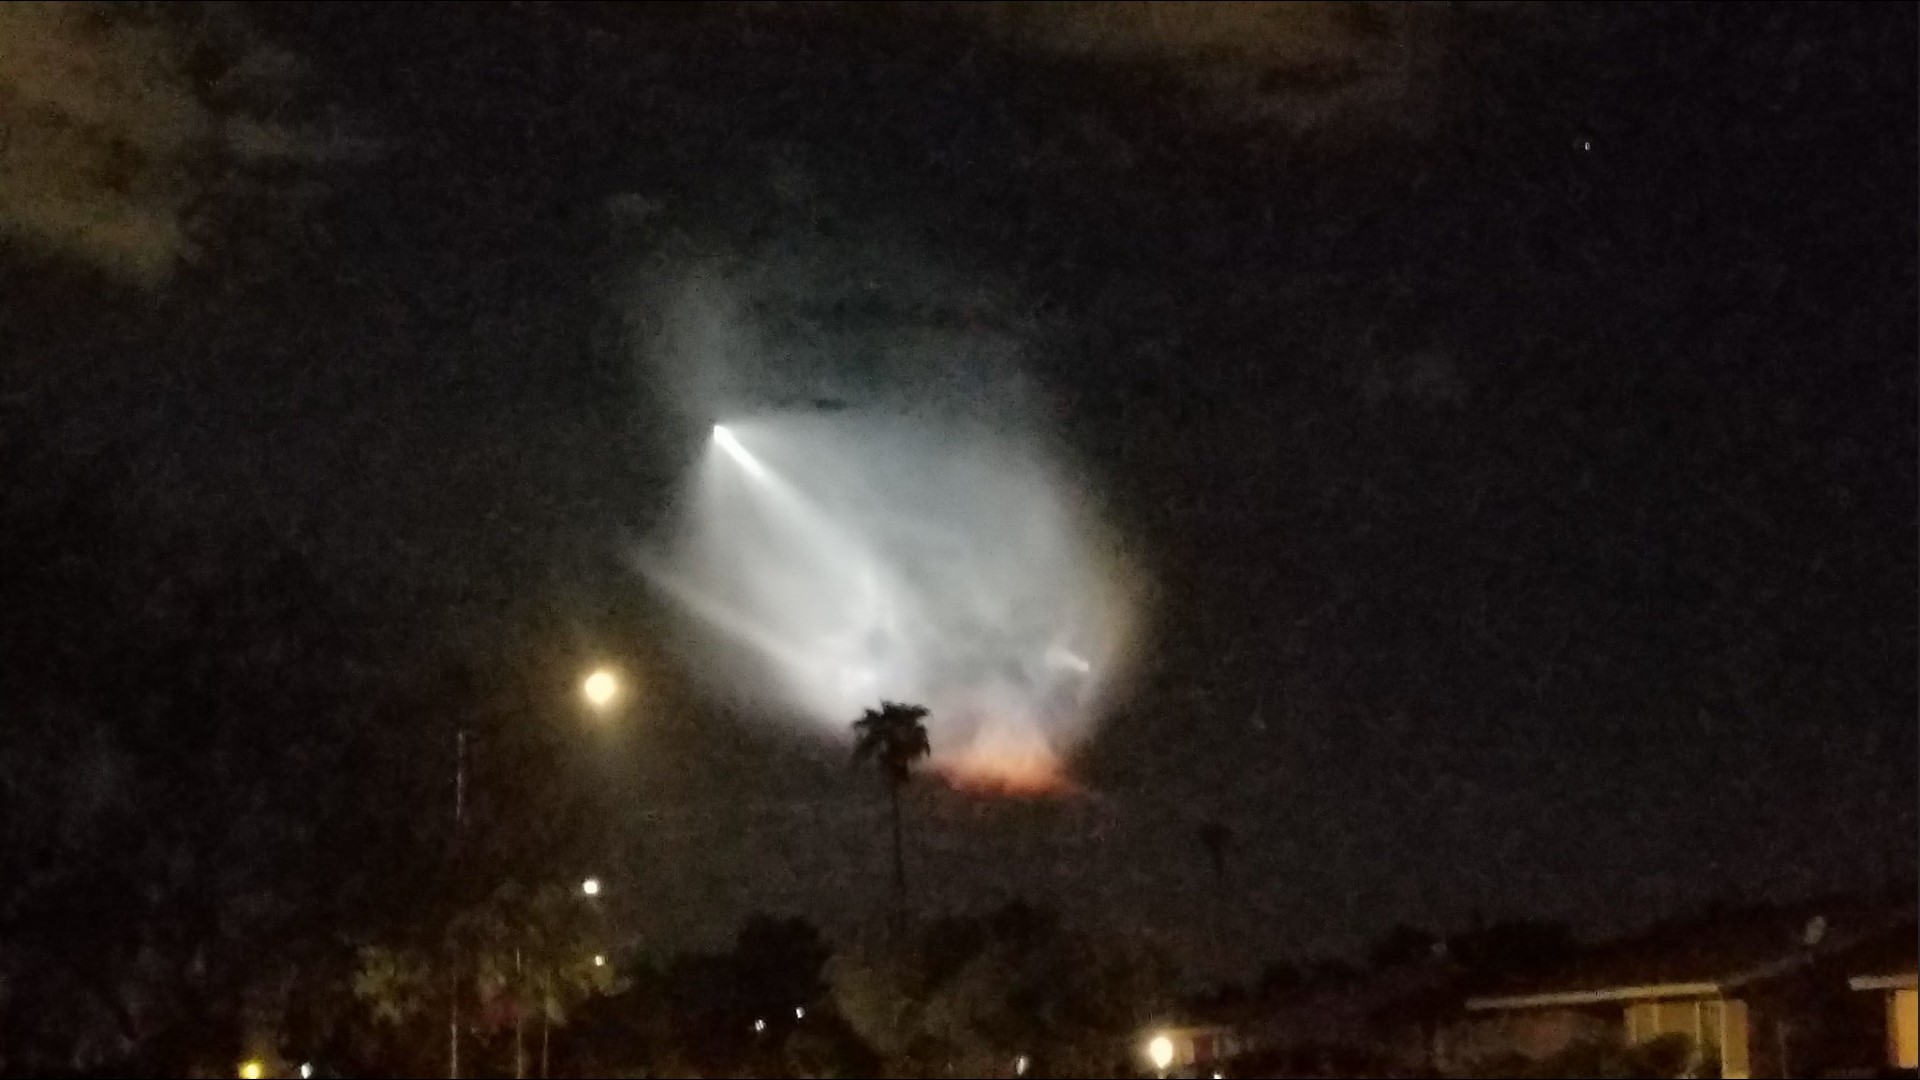 Here's why Arizona could see even more strange lights in the sky this